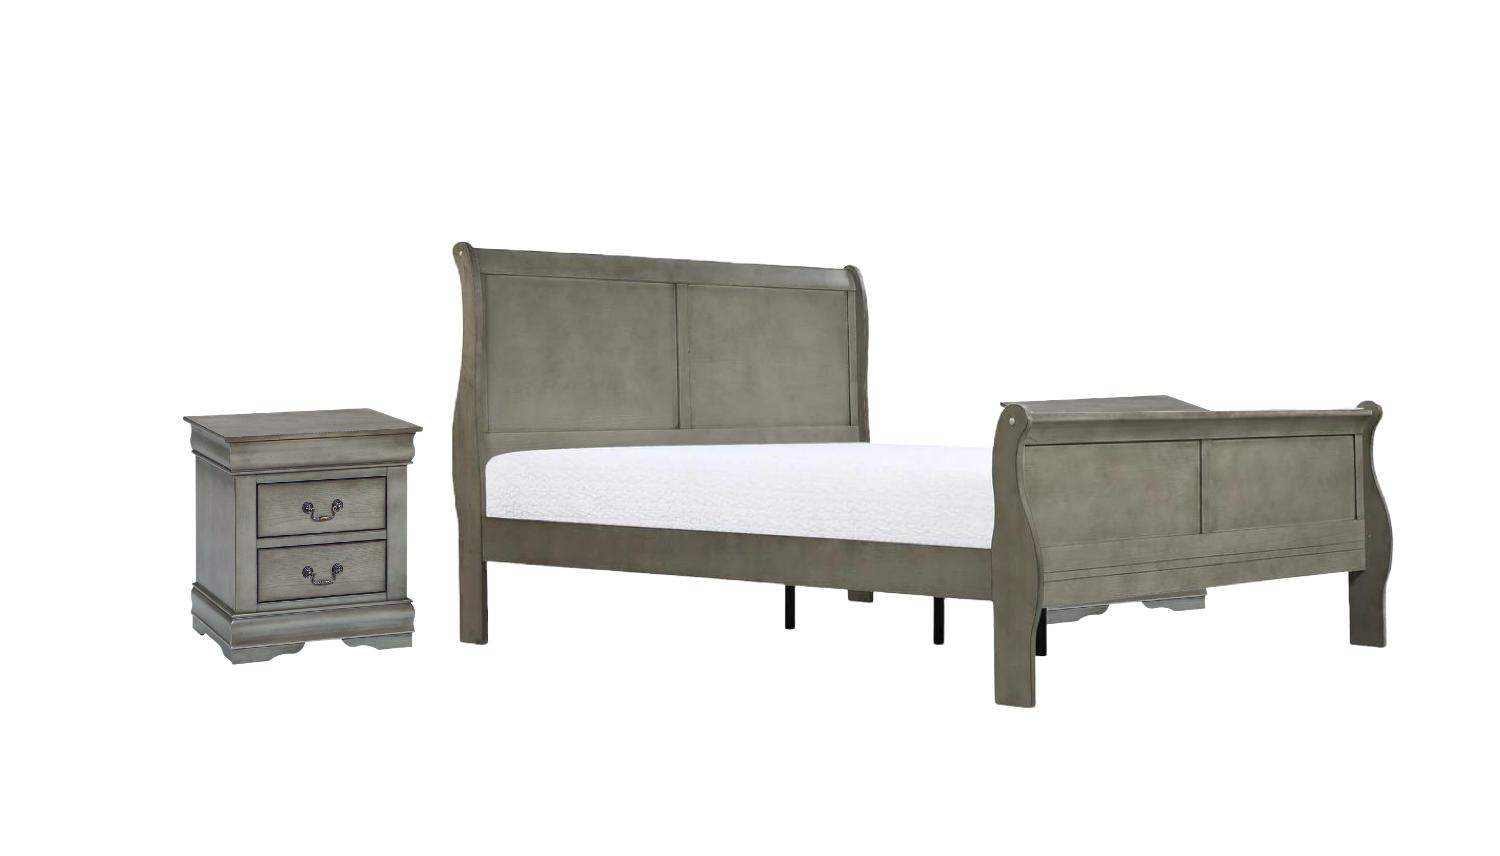 Contemporary, Simple Panel Bedroom Set Louis Philip B3550-Q-Bed-3pcs in Gray 